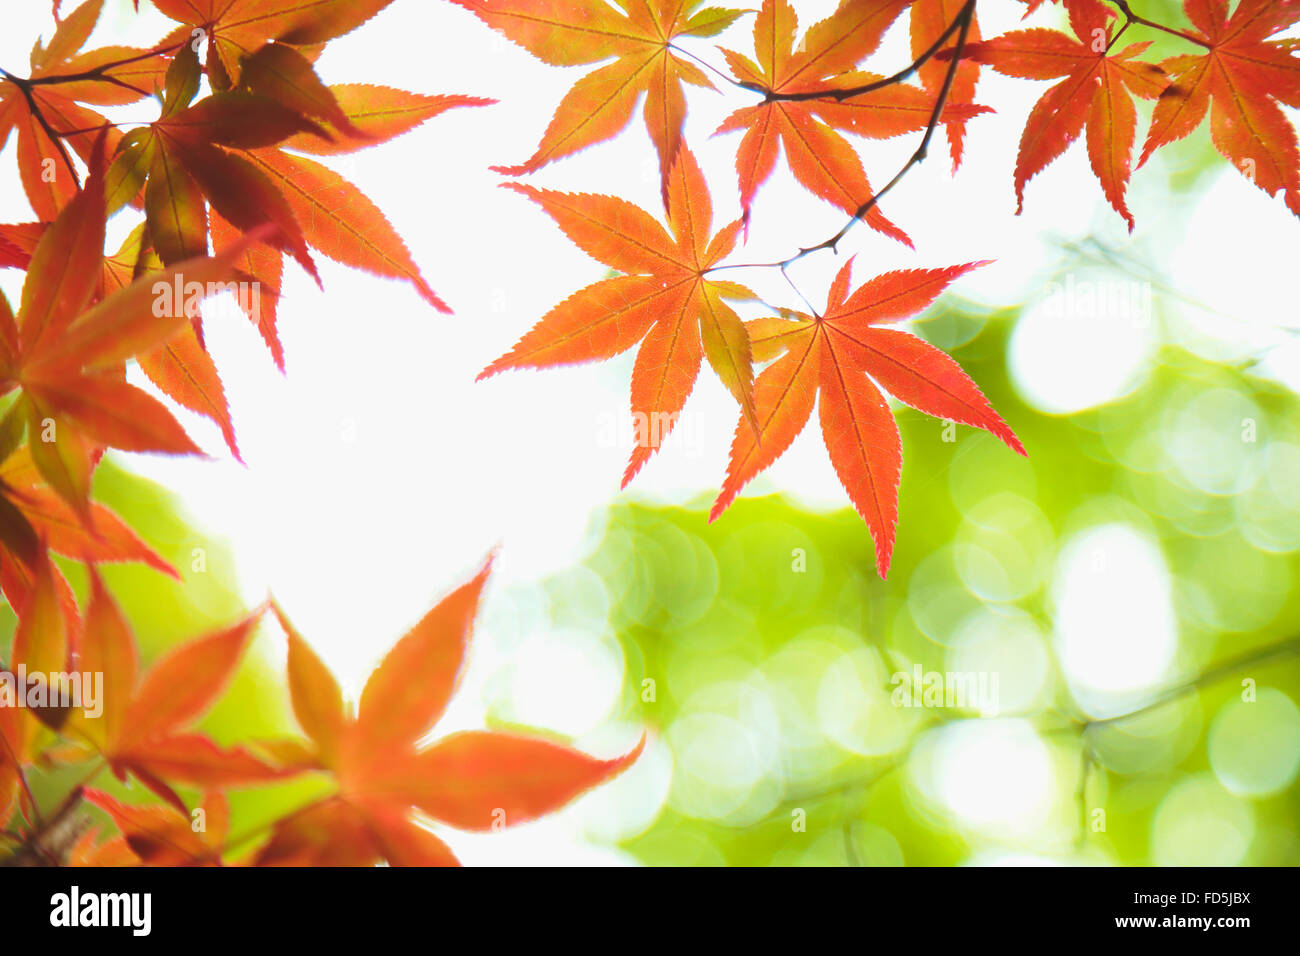 Red Maple Leaves Stockfoto